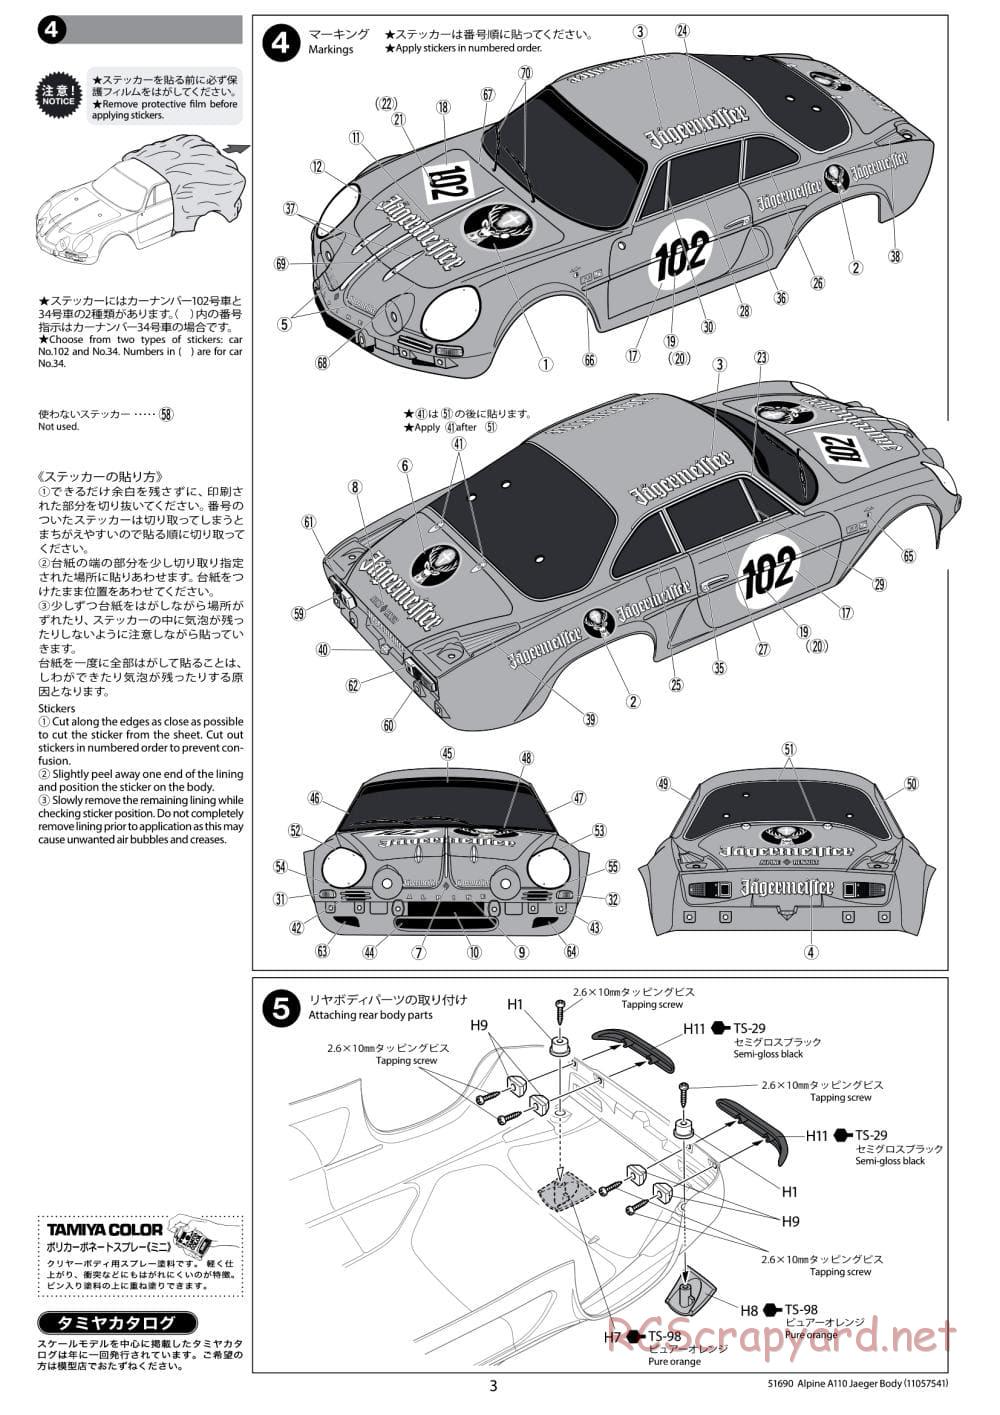 Tamiya - Alpine A110 Jagermeister 1973 - M-06 Chassis - Body Manual - Page 3